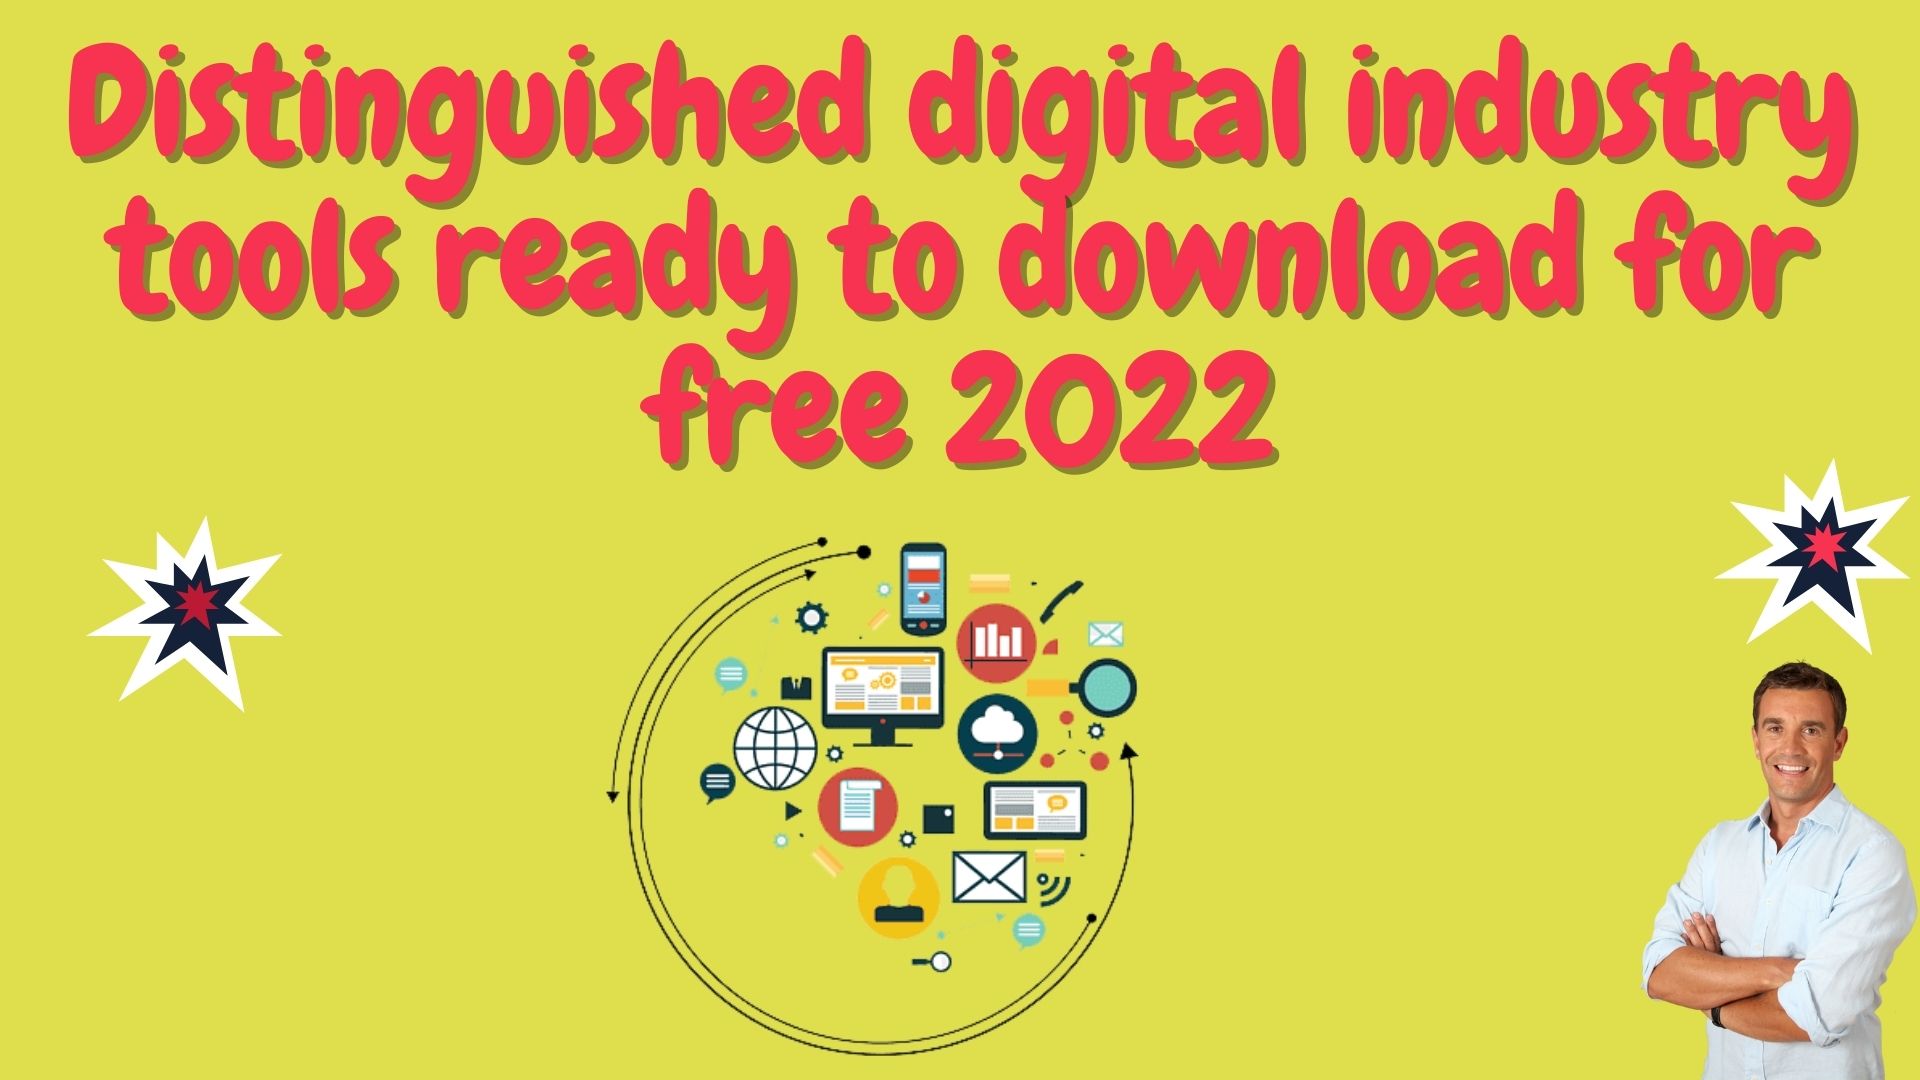 Distinguished digital industry tools ready to download for free 2022